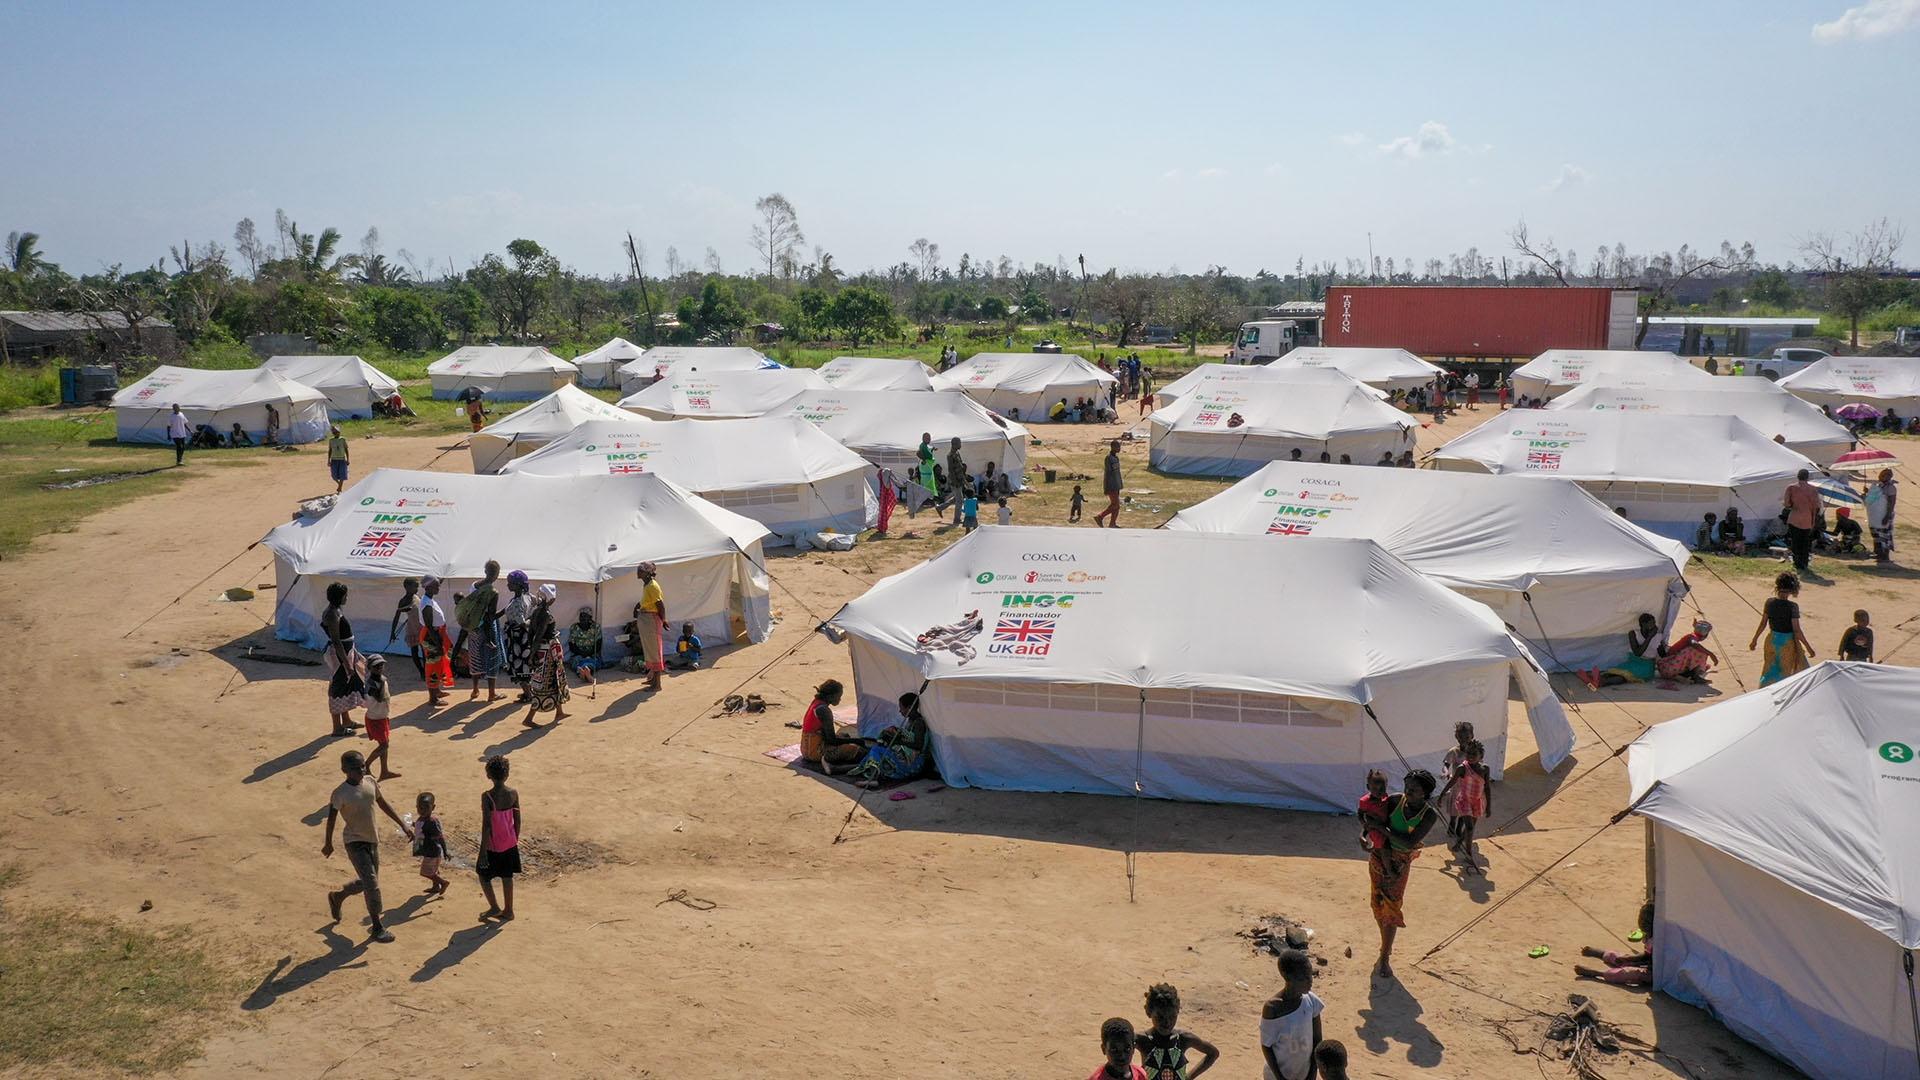 A temporary camp set up near Dondo, Sofala following Cyclone Idai in Mozambique in March 2019.